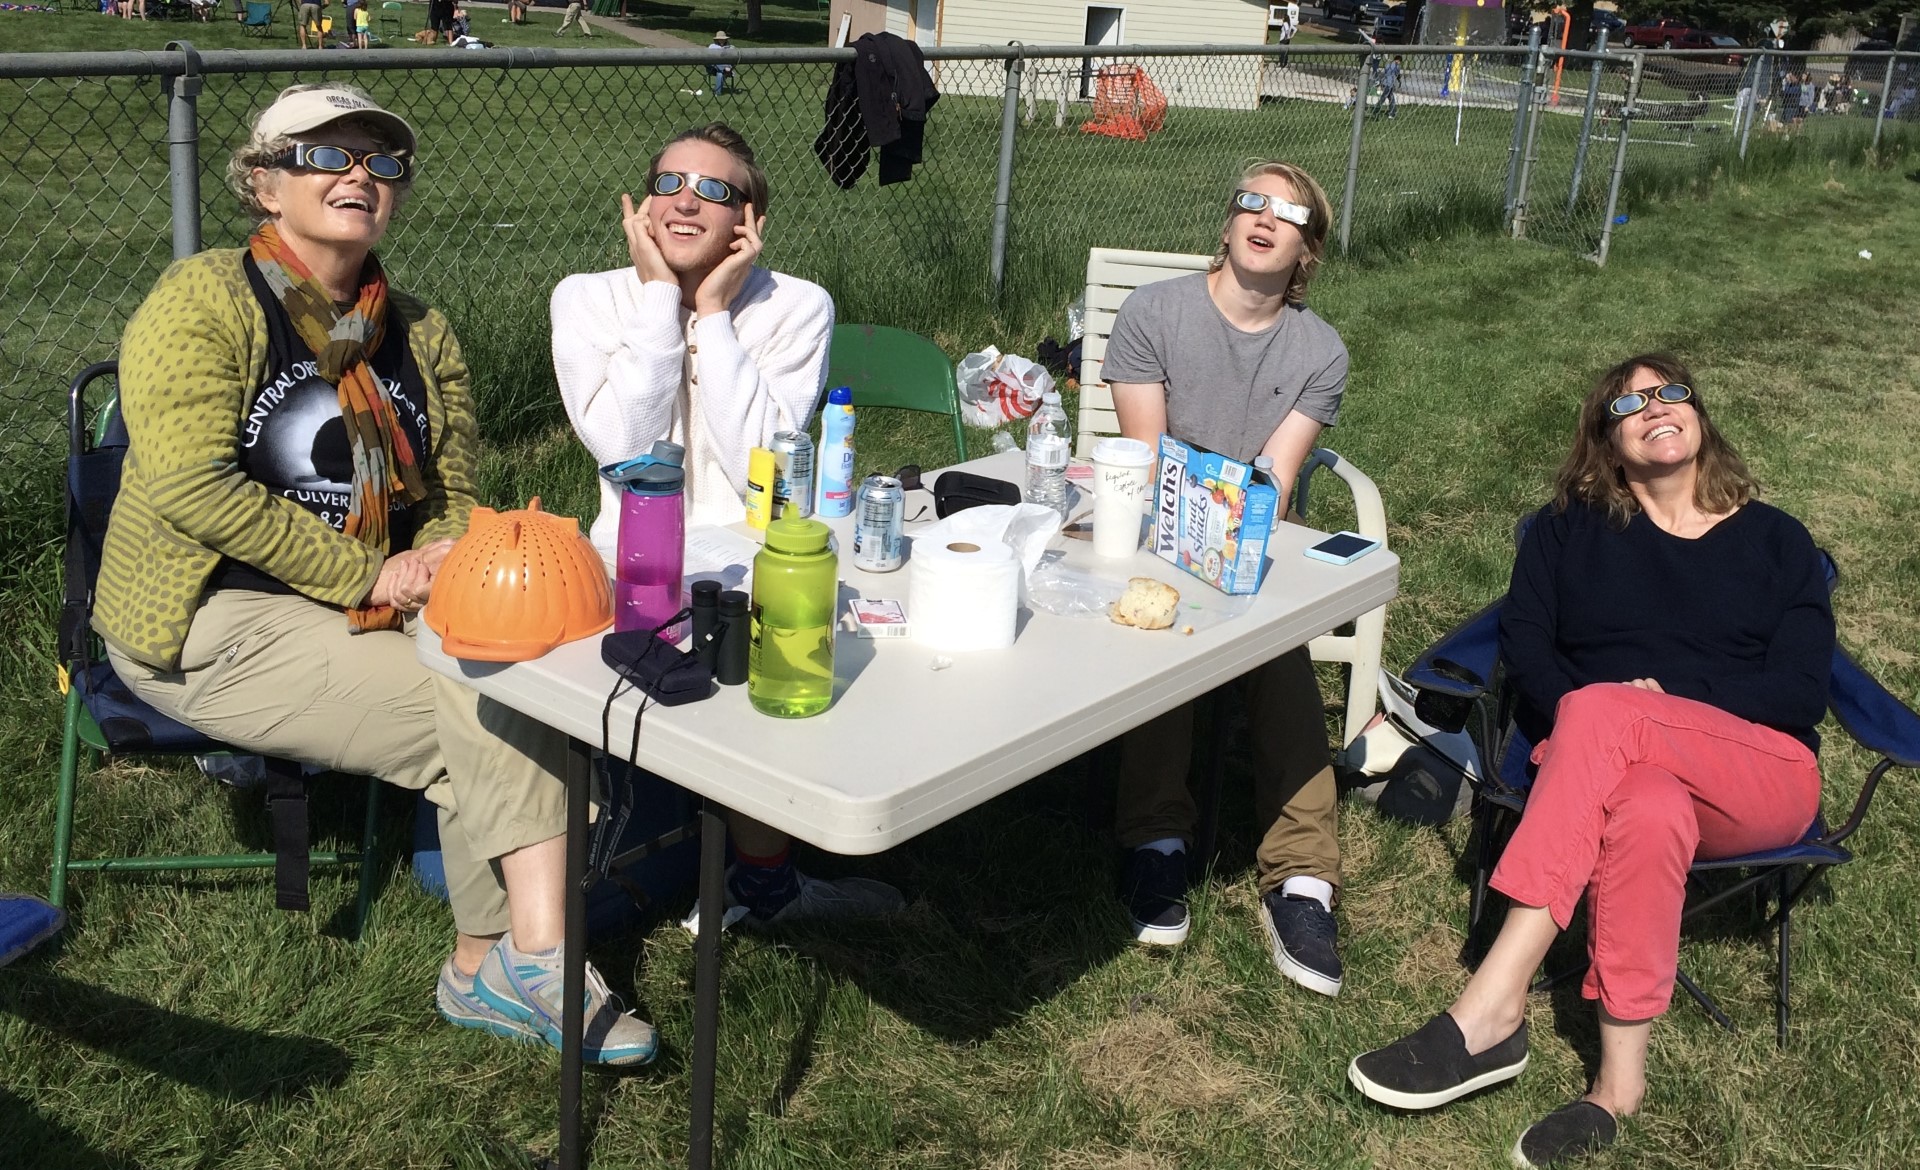 Potgoraph of people with eclipse glasses starring at the sun.